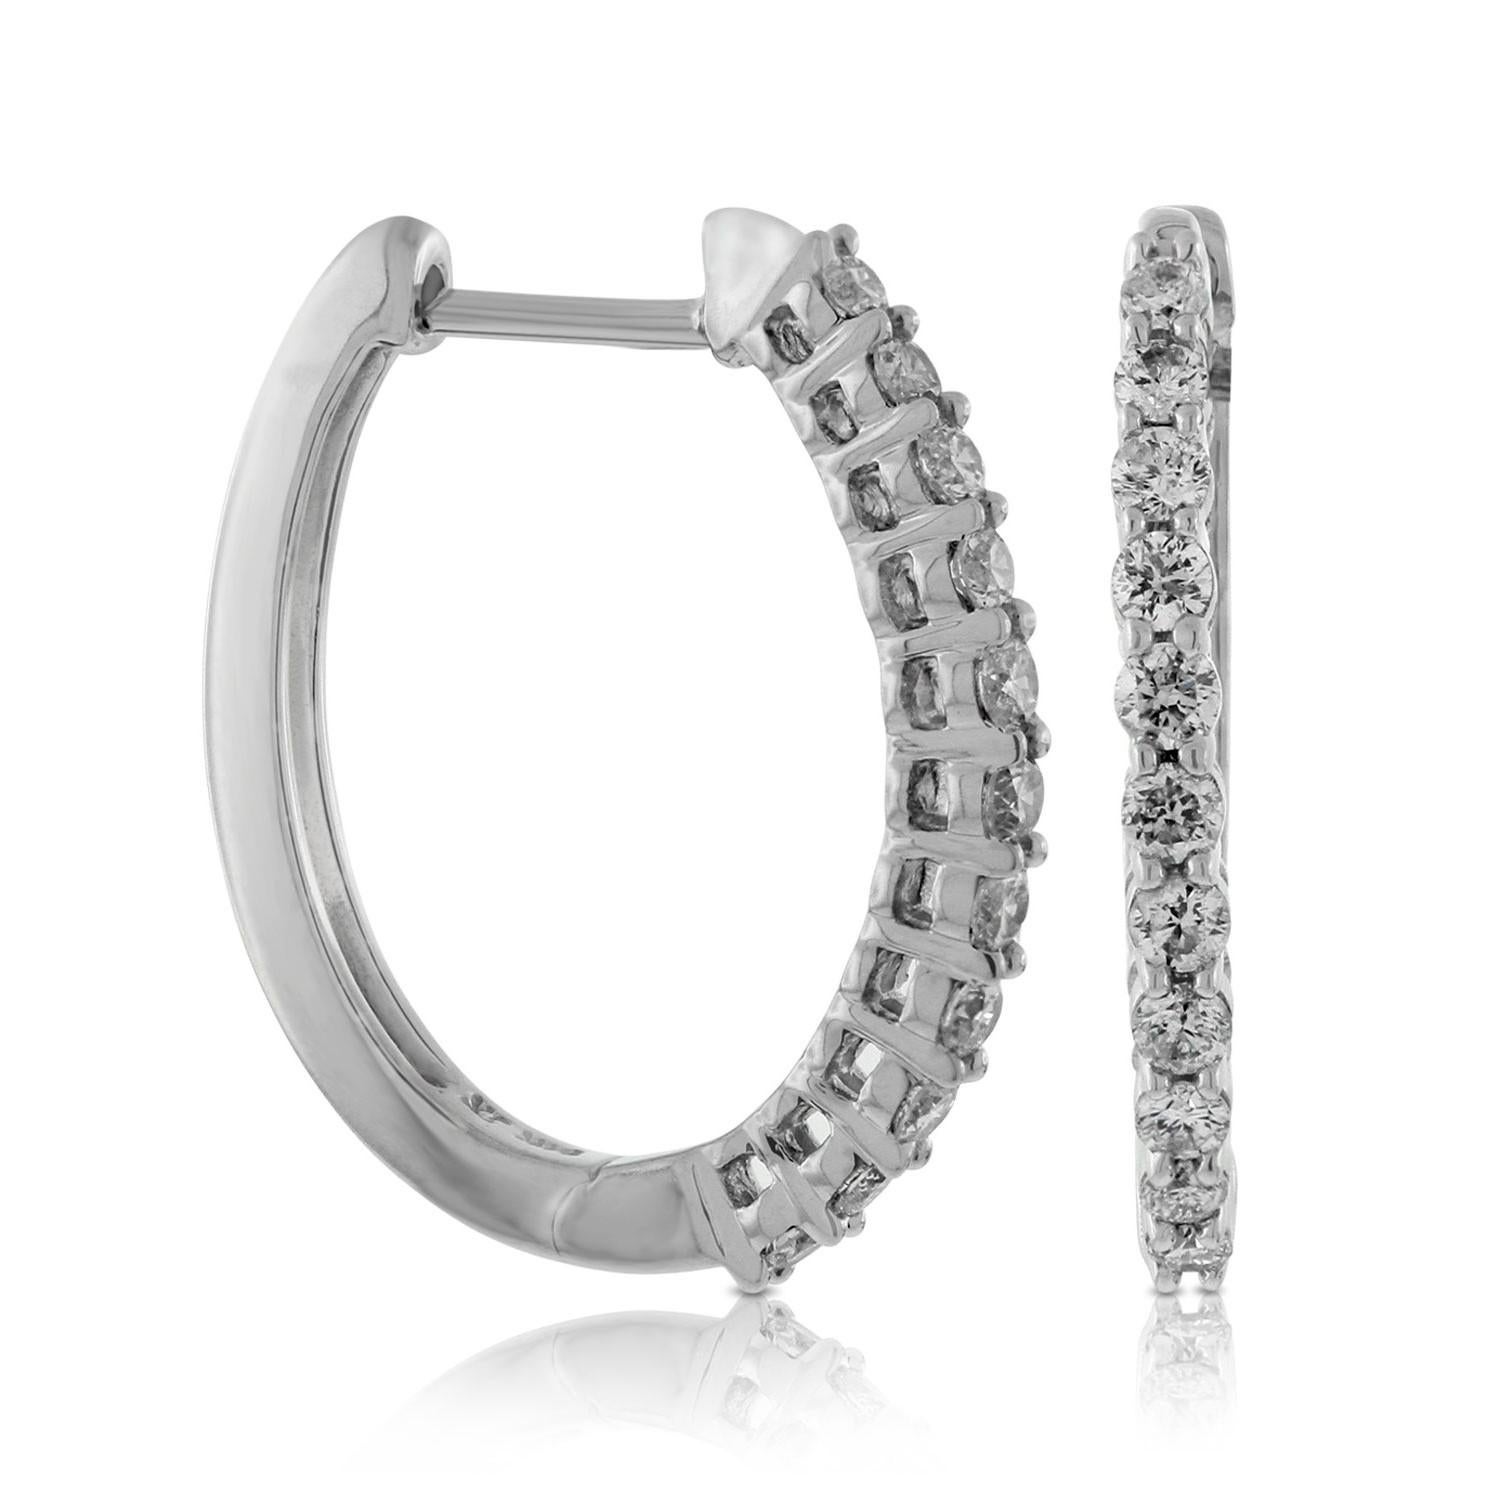 Nothing says luxury like an incredible pair of diamond oval hoop earrings. These stunning brightly polished 14 karat white gold outside oval-shaped hoop earrings feature a total of 26 round brilliant cut diamonds totaling .75 carats are prong set on